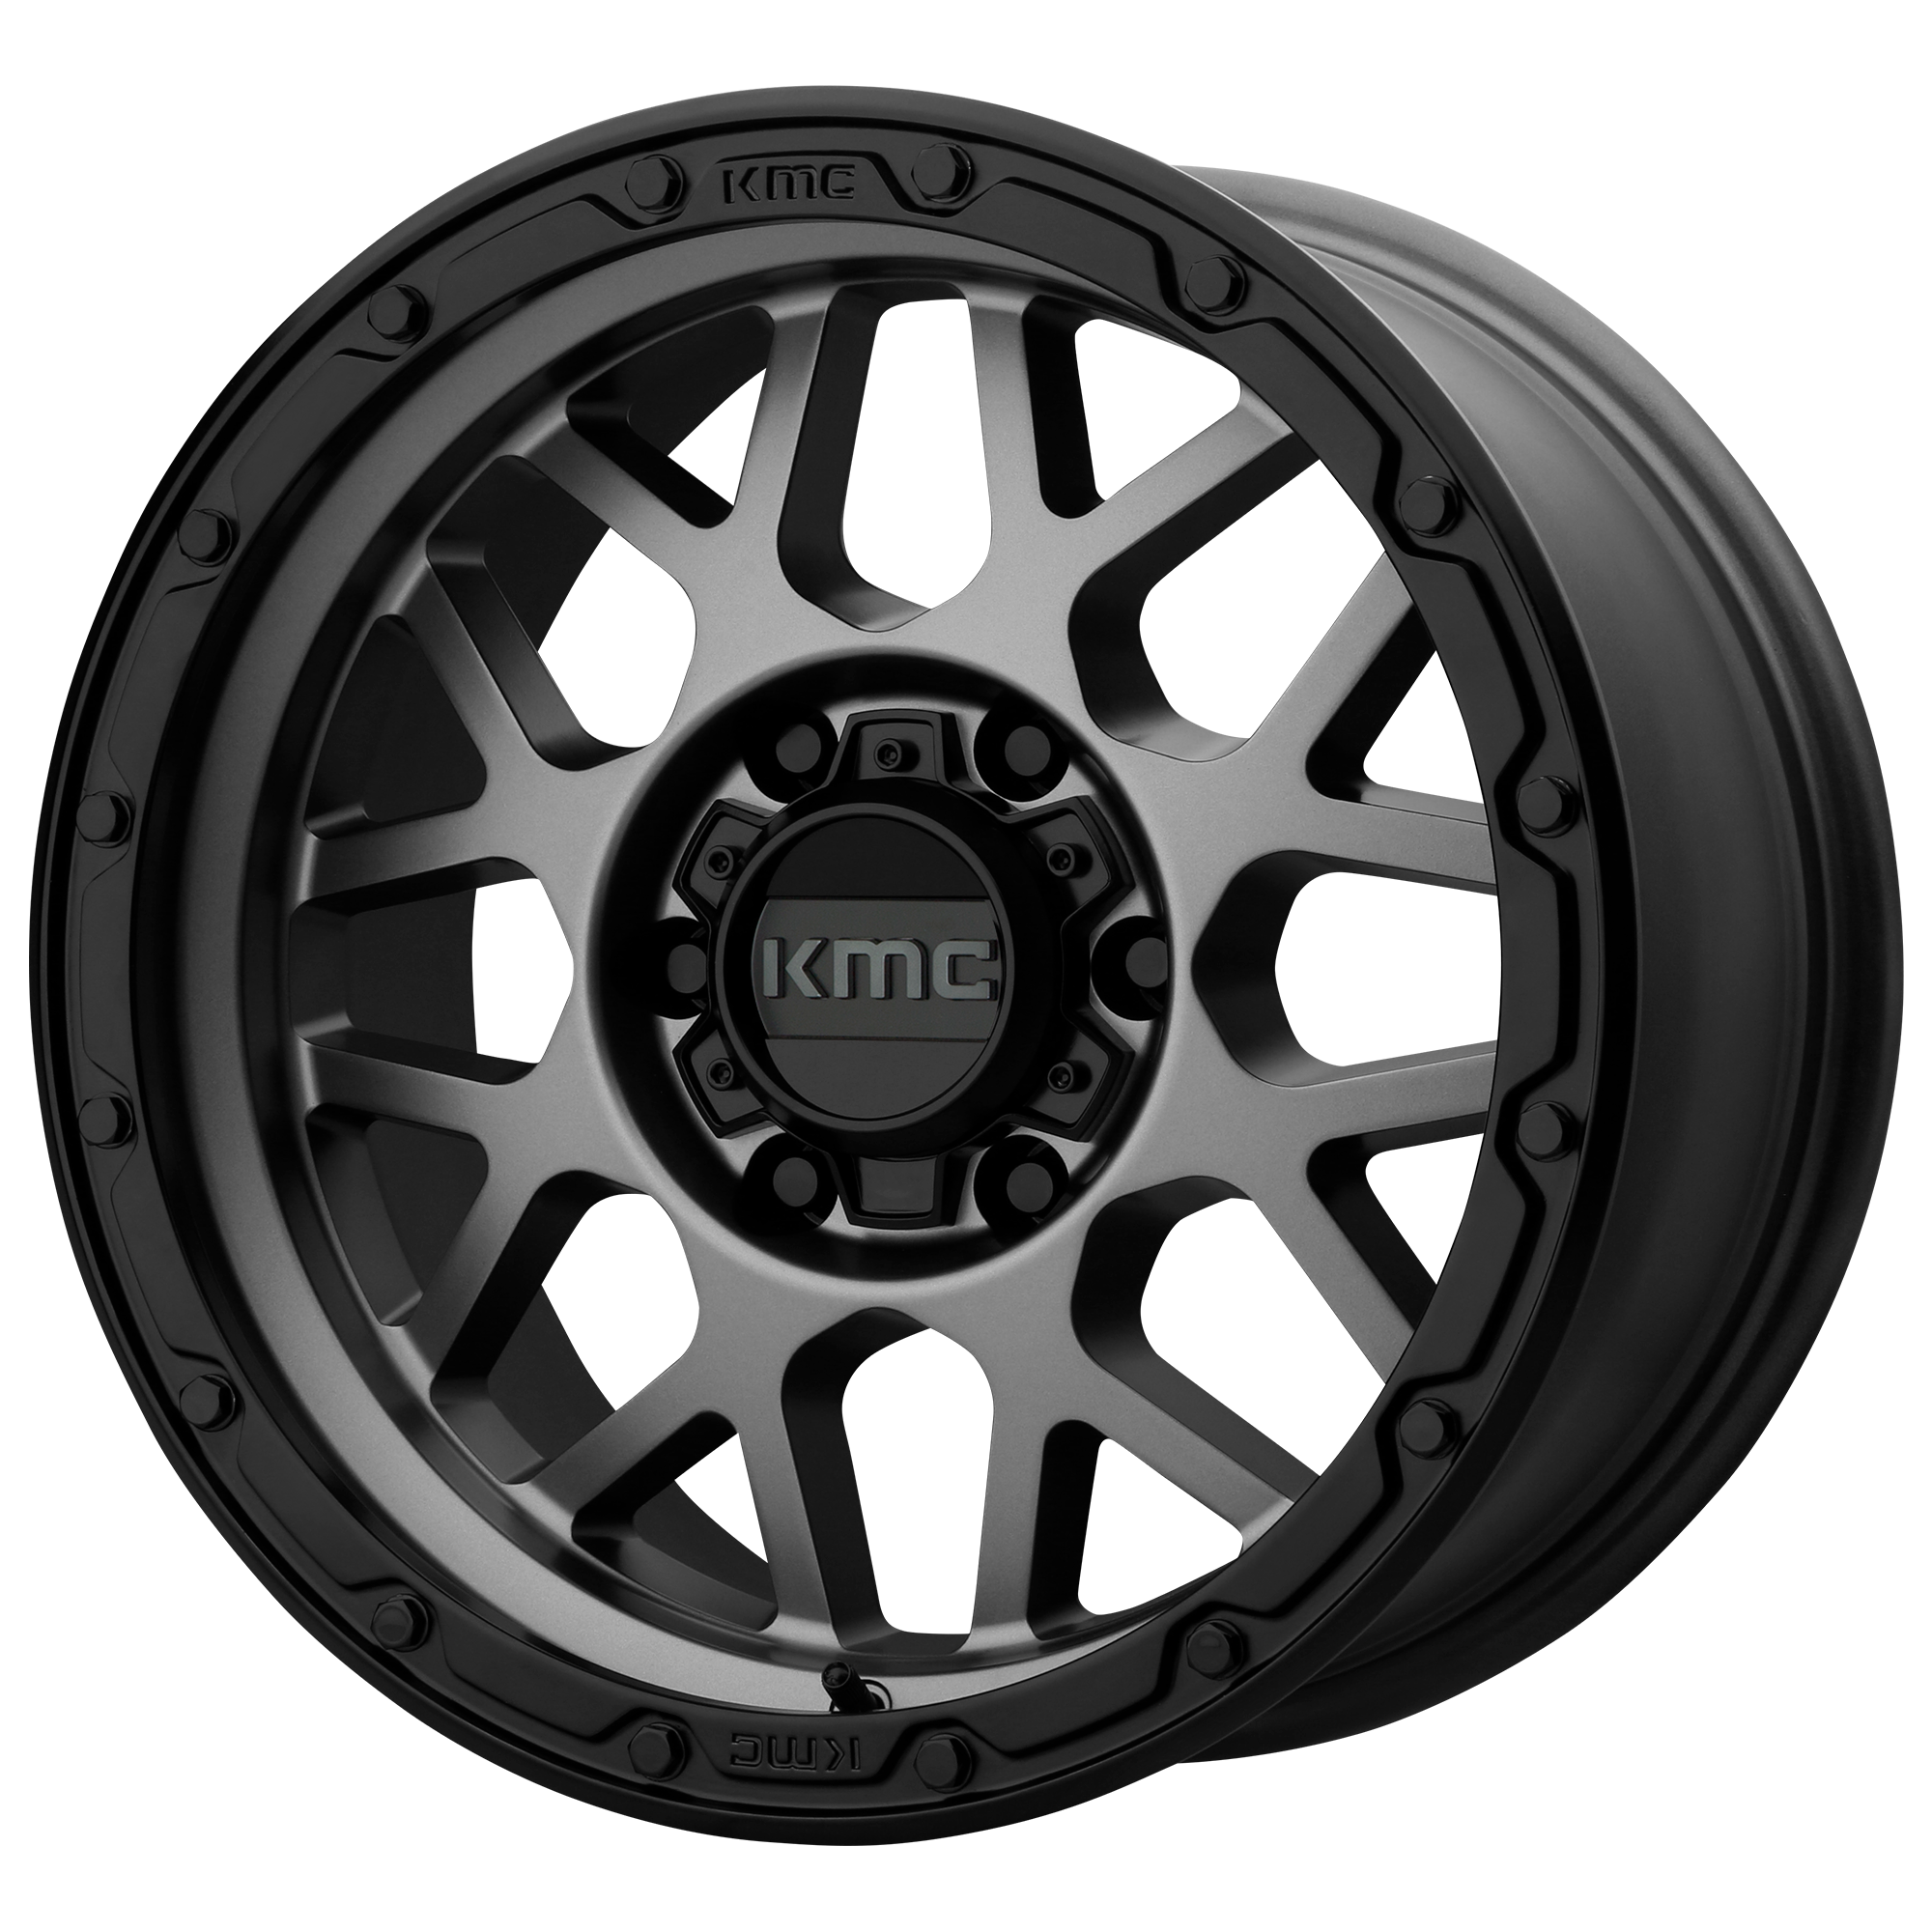 GRENADE OFF-ROAD 17x9 8x180.00 MATTE GRAY W/ MATTE BLACK LIP (18 mm) - Tires and Engine Performance